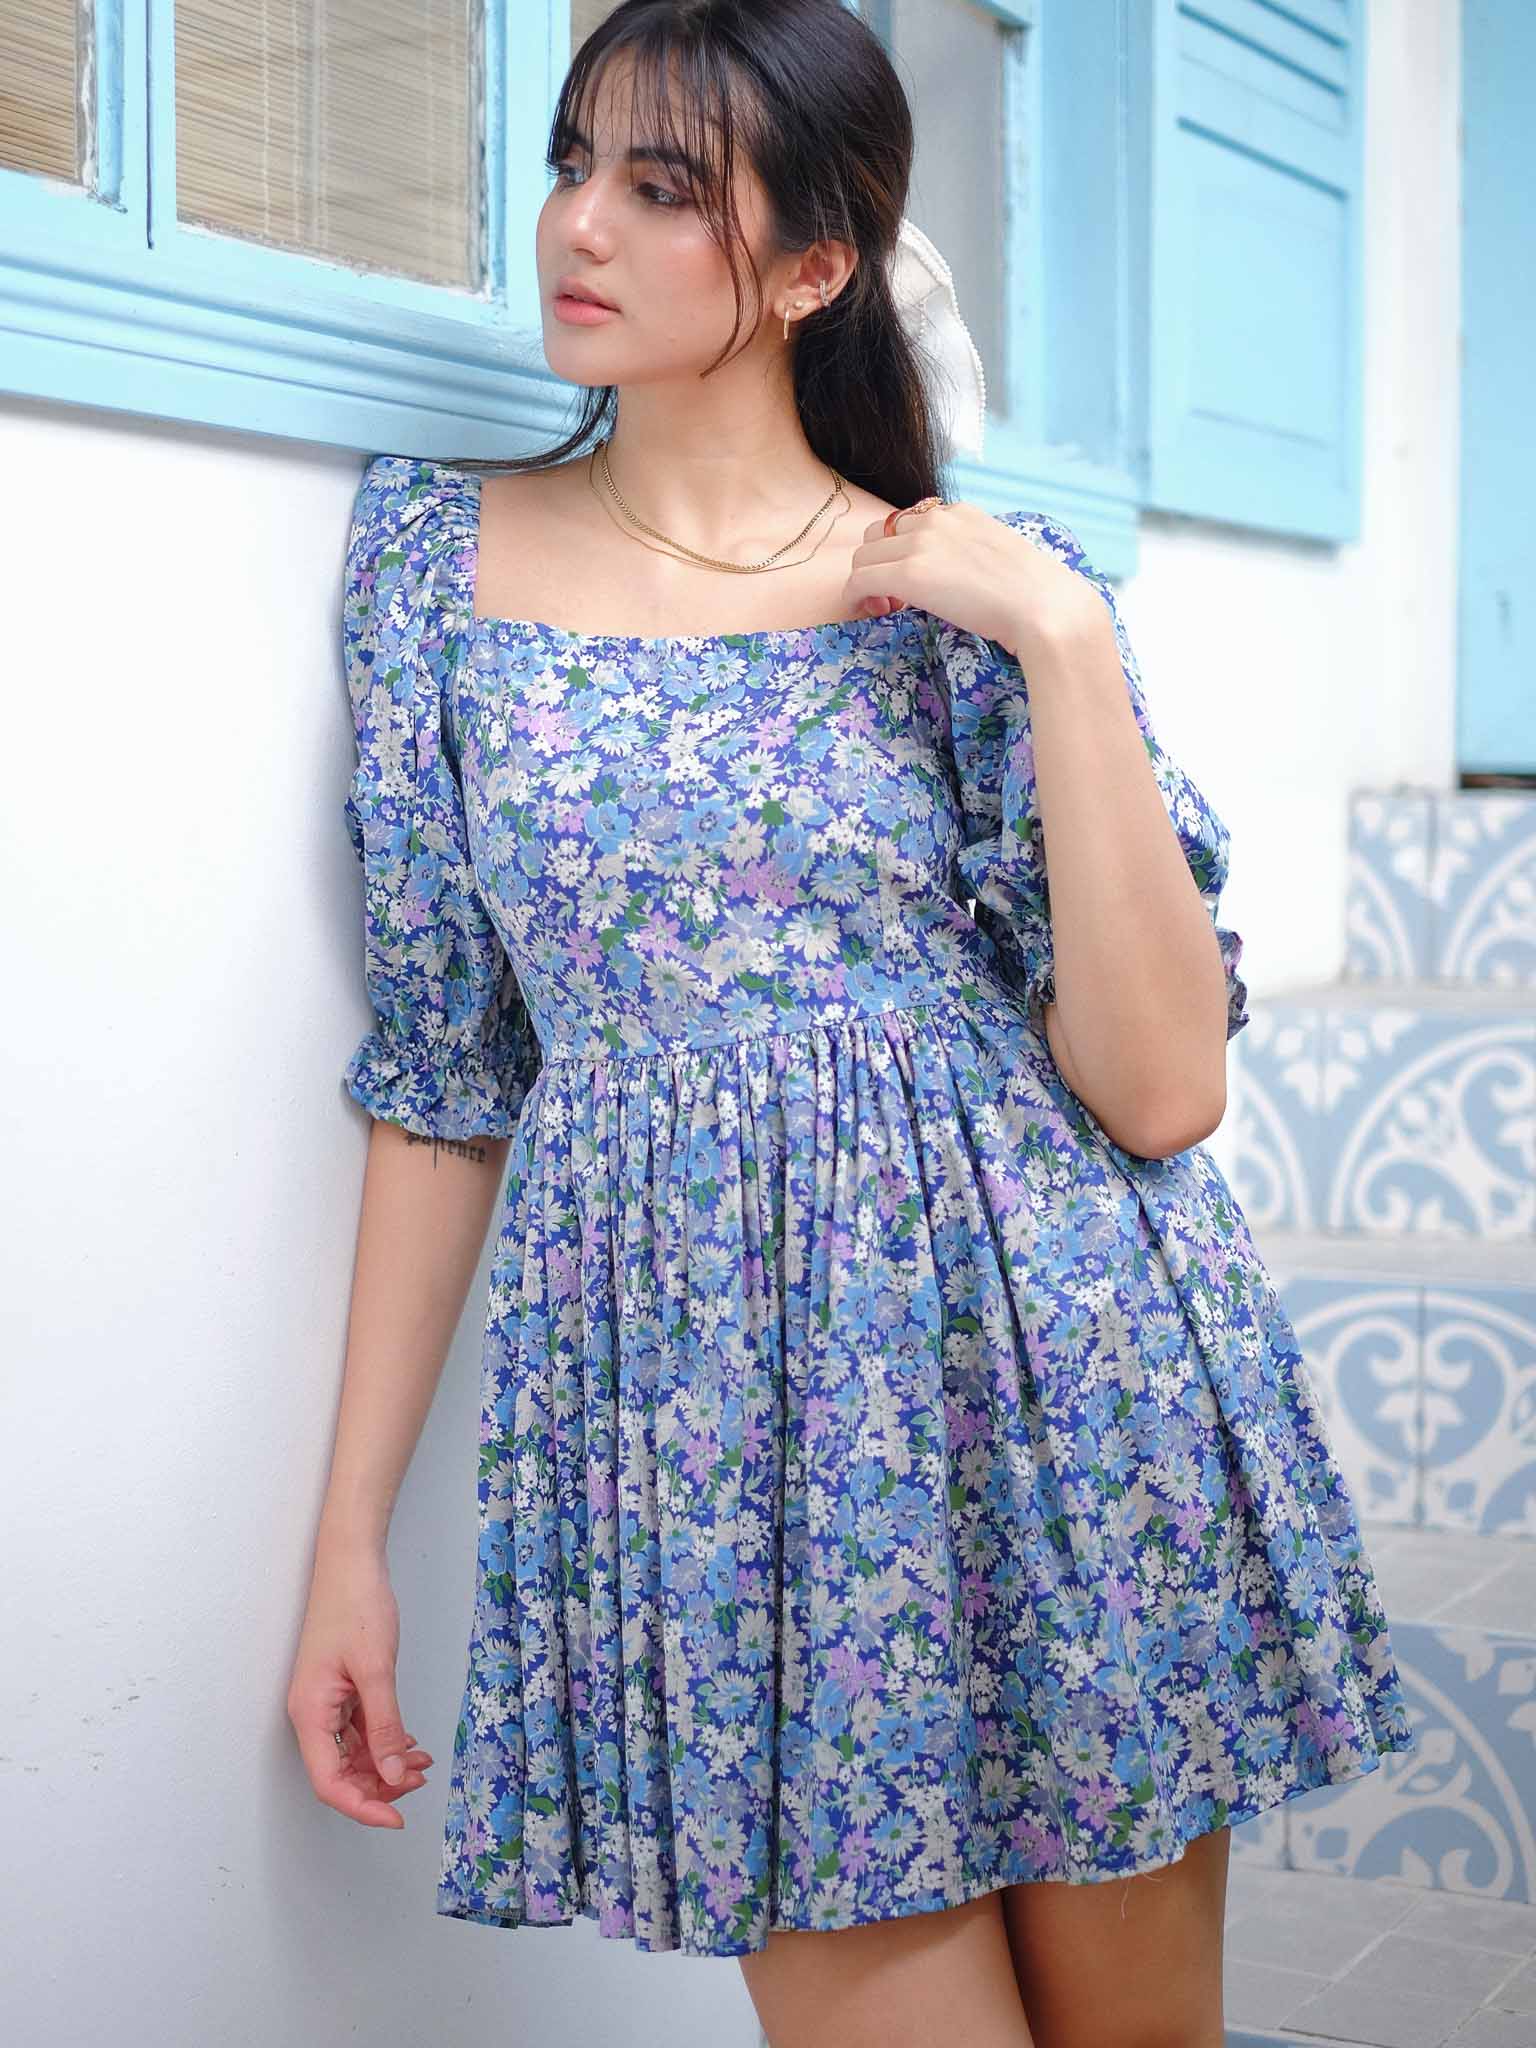 Candice baby doll dress - Blue floral print